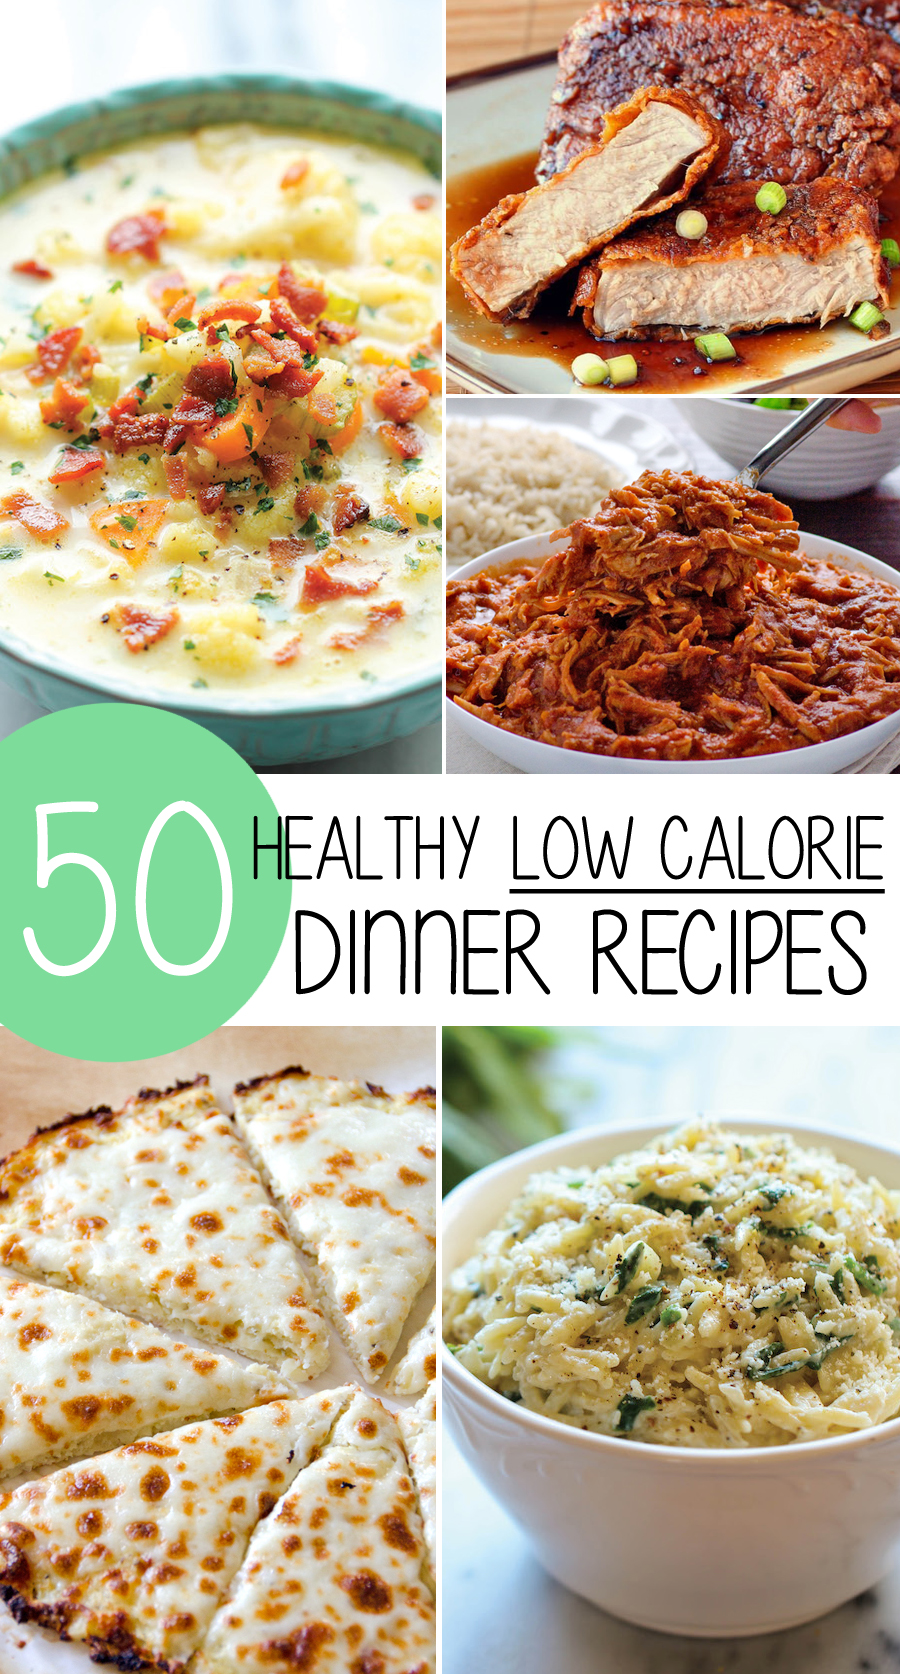 50 healthy low calorie weight loss dinner recipes!